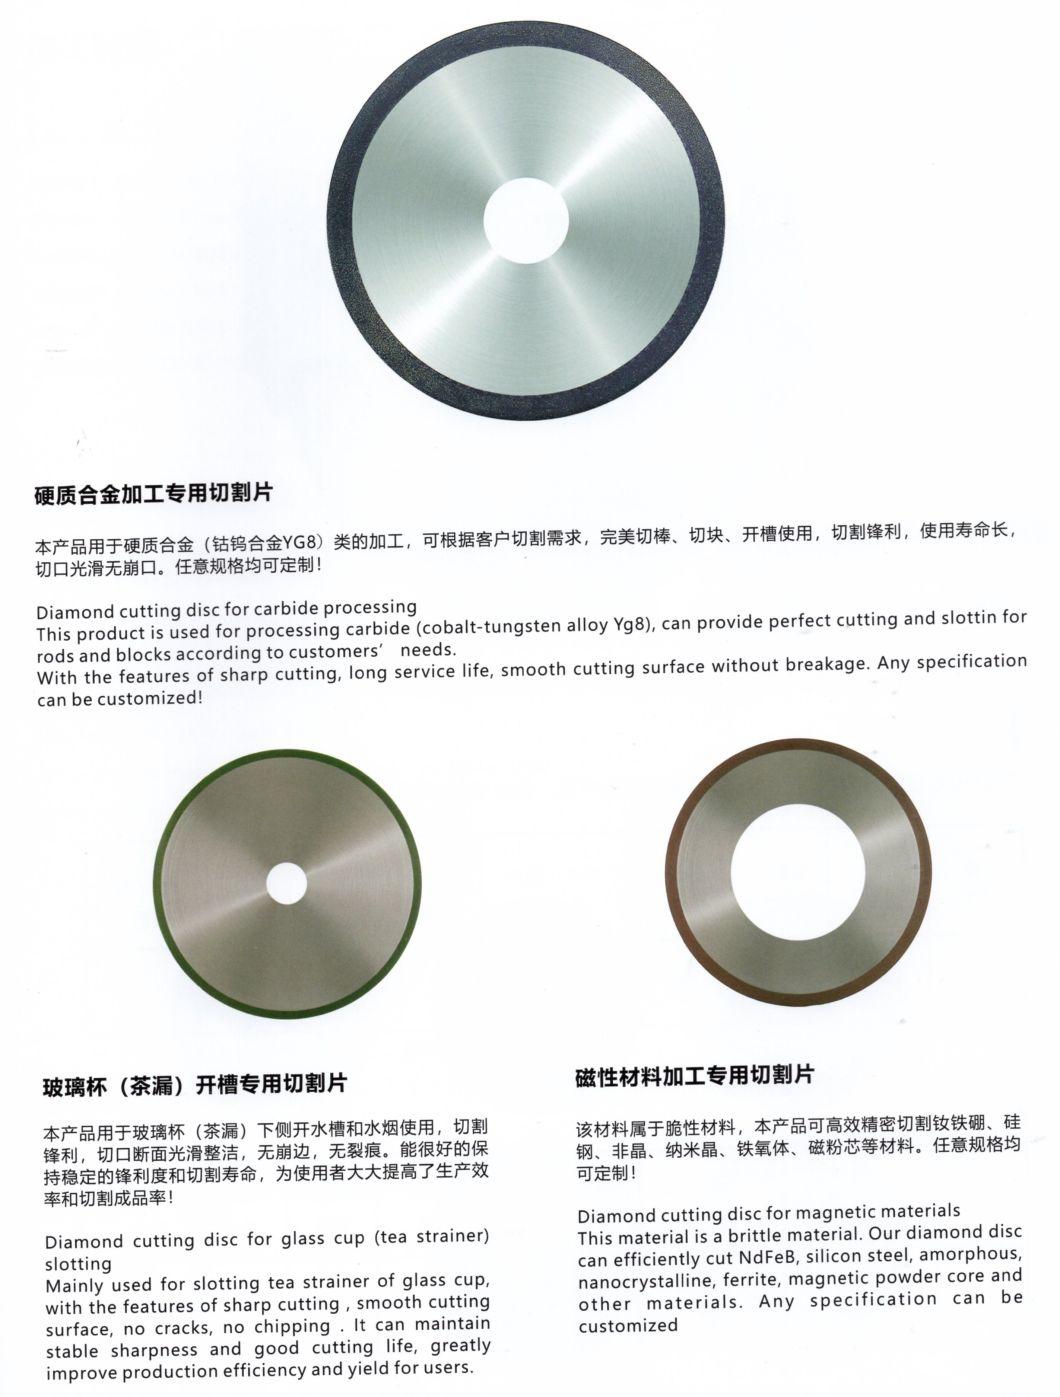 Resin Bonded Ultra Thin Diamond Cutting Disc for Magnetic Materials